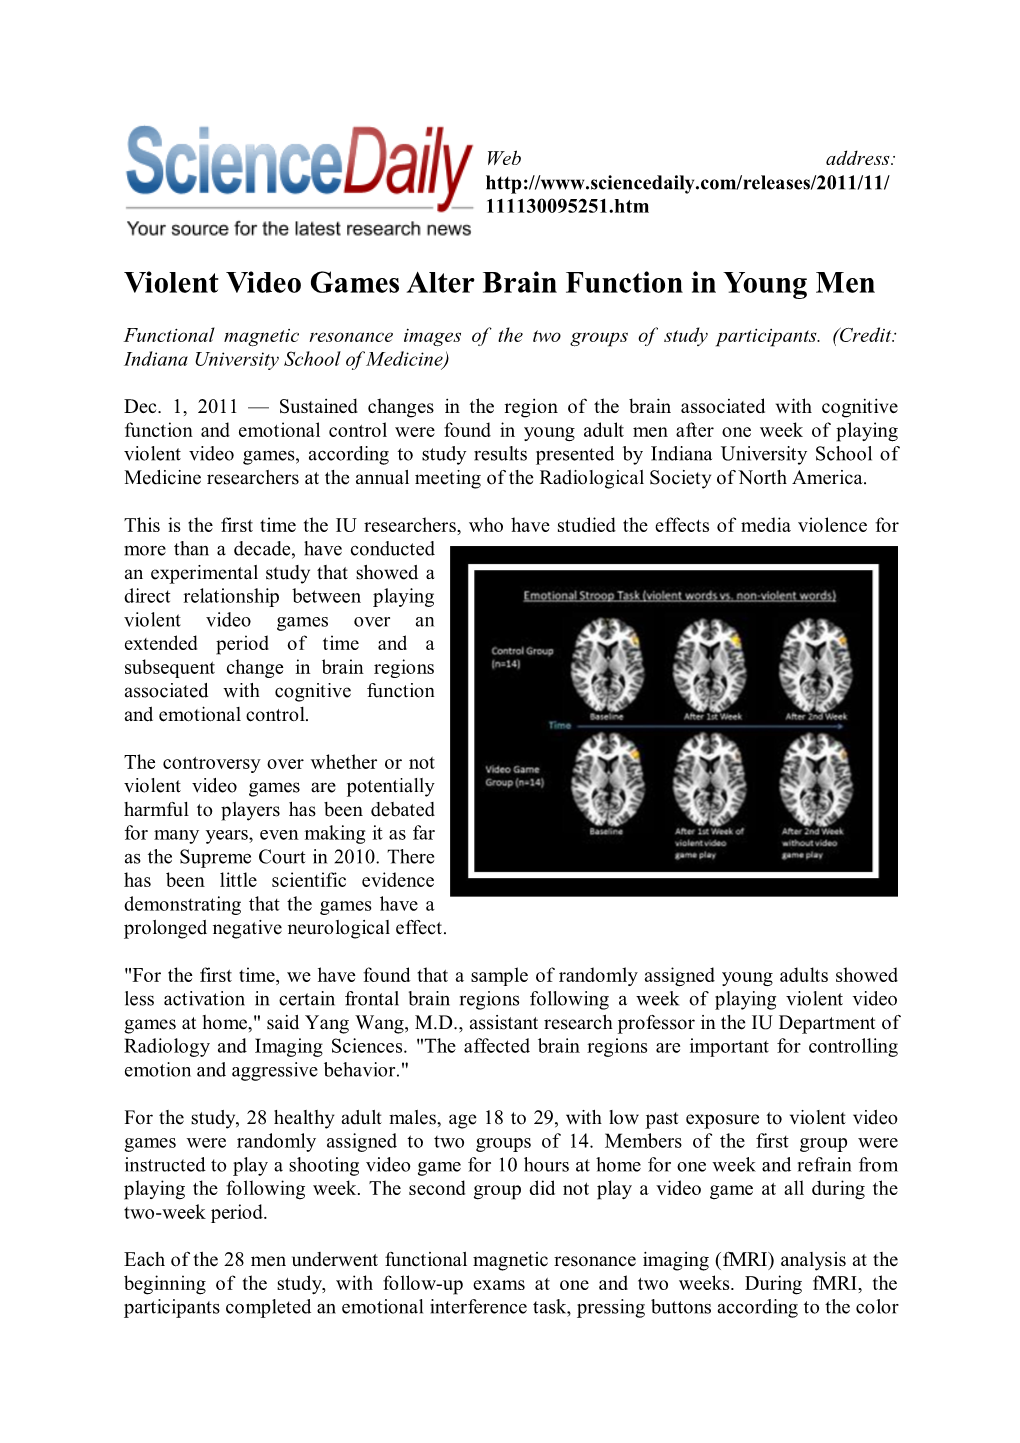 Download Violent Video Games Alter Brain Function in Young